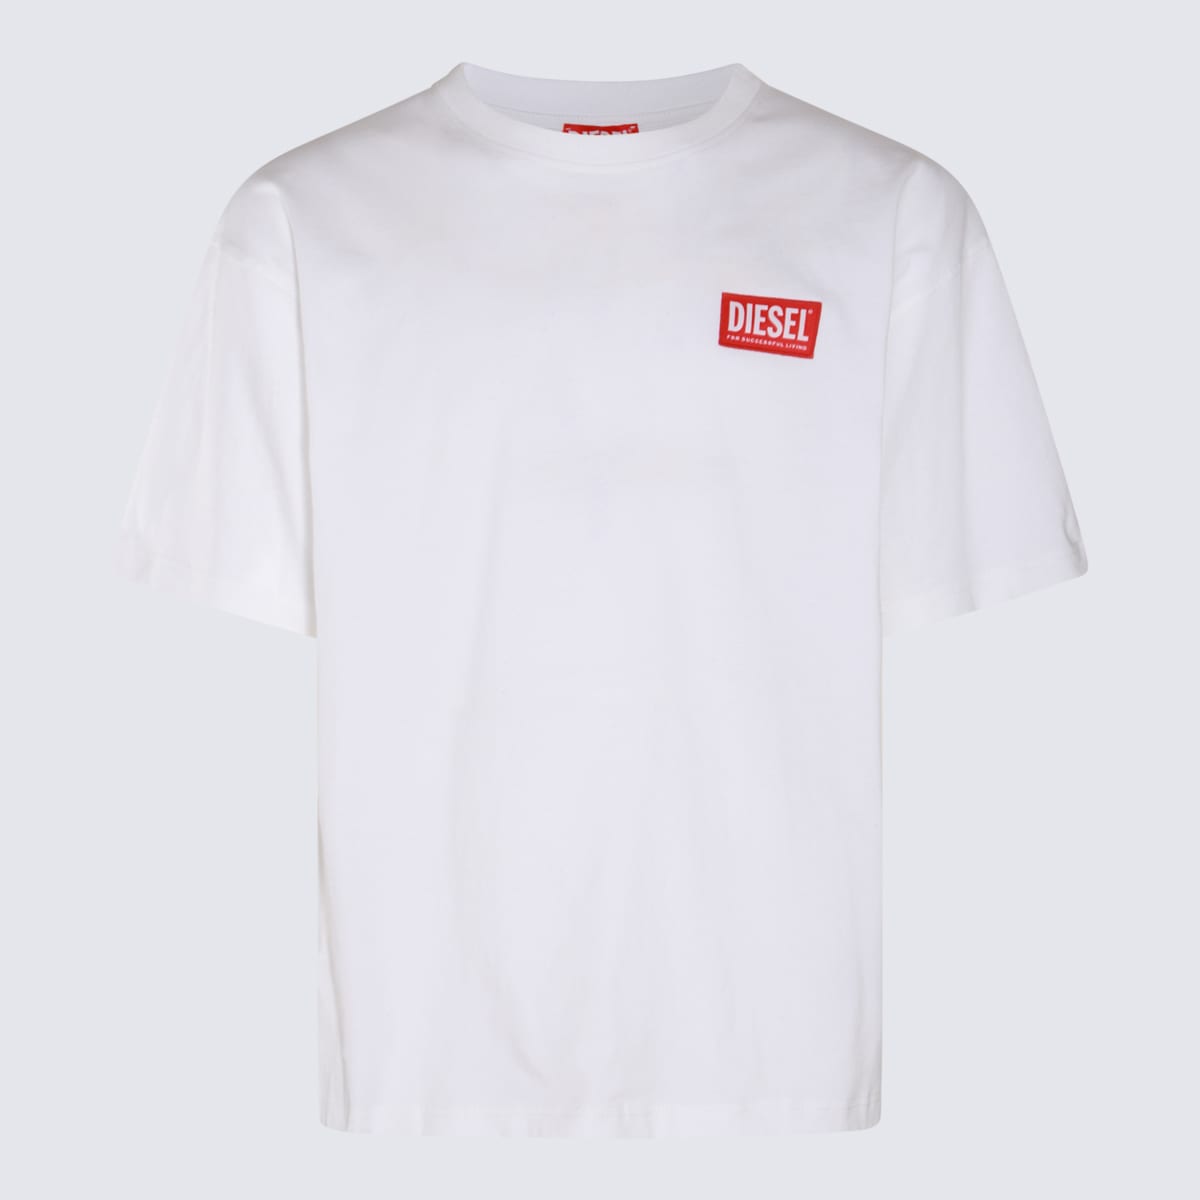 Diesel White And Red Cotton T-shirt